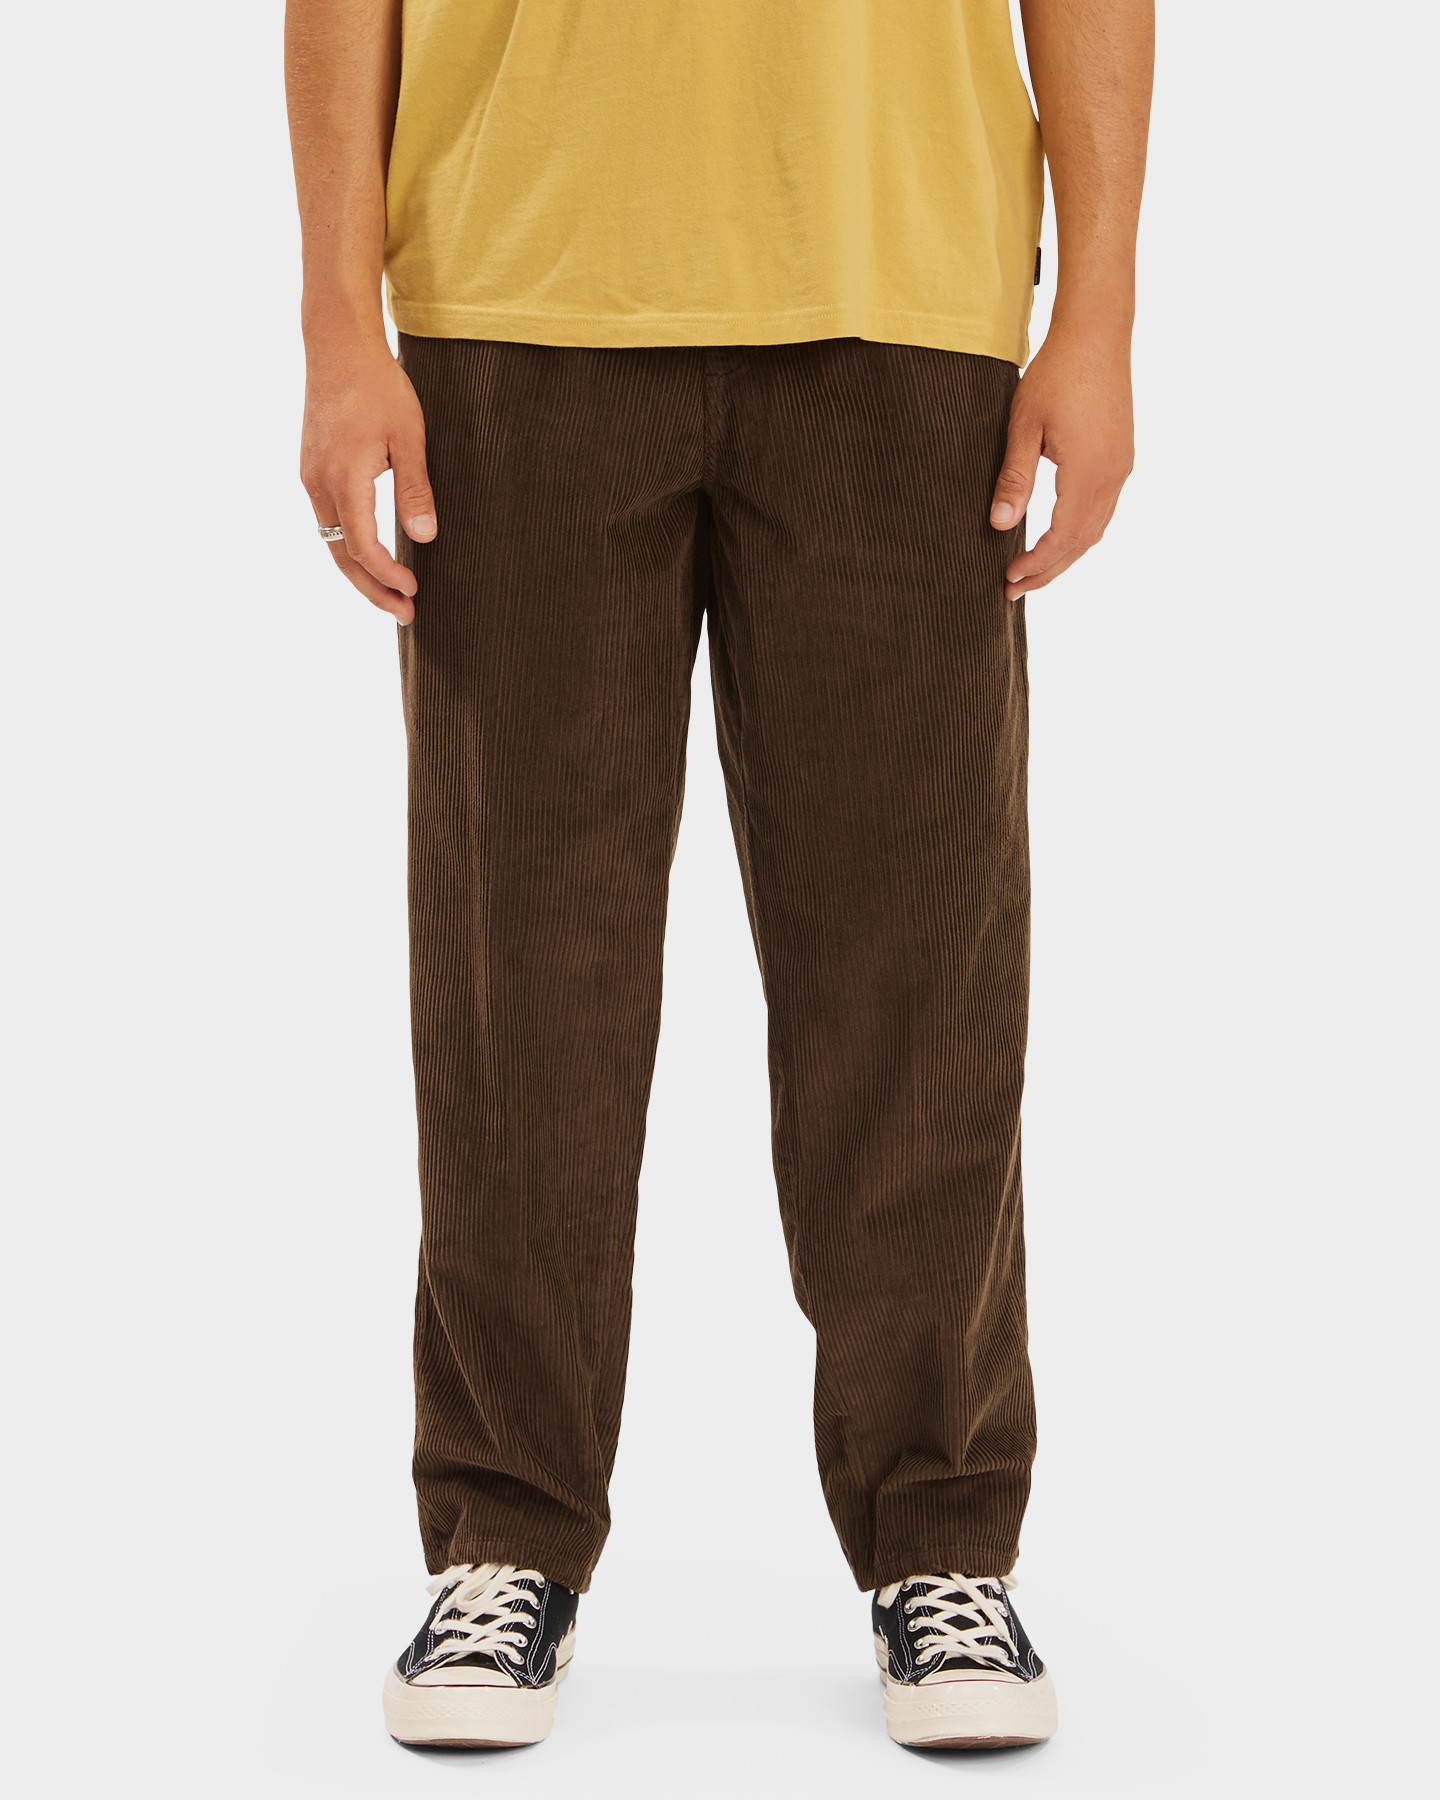 Billabong Wrangler Bowie Layback Pants - Coffee | SurfStitch